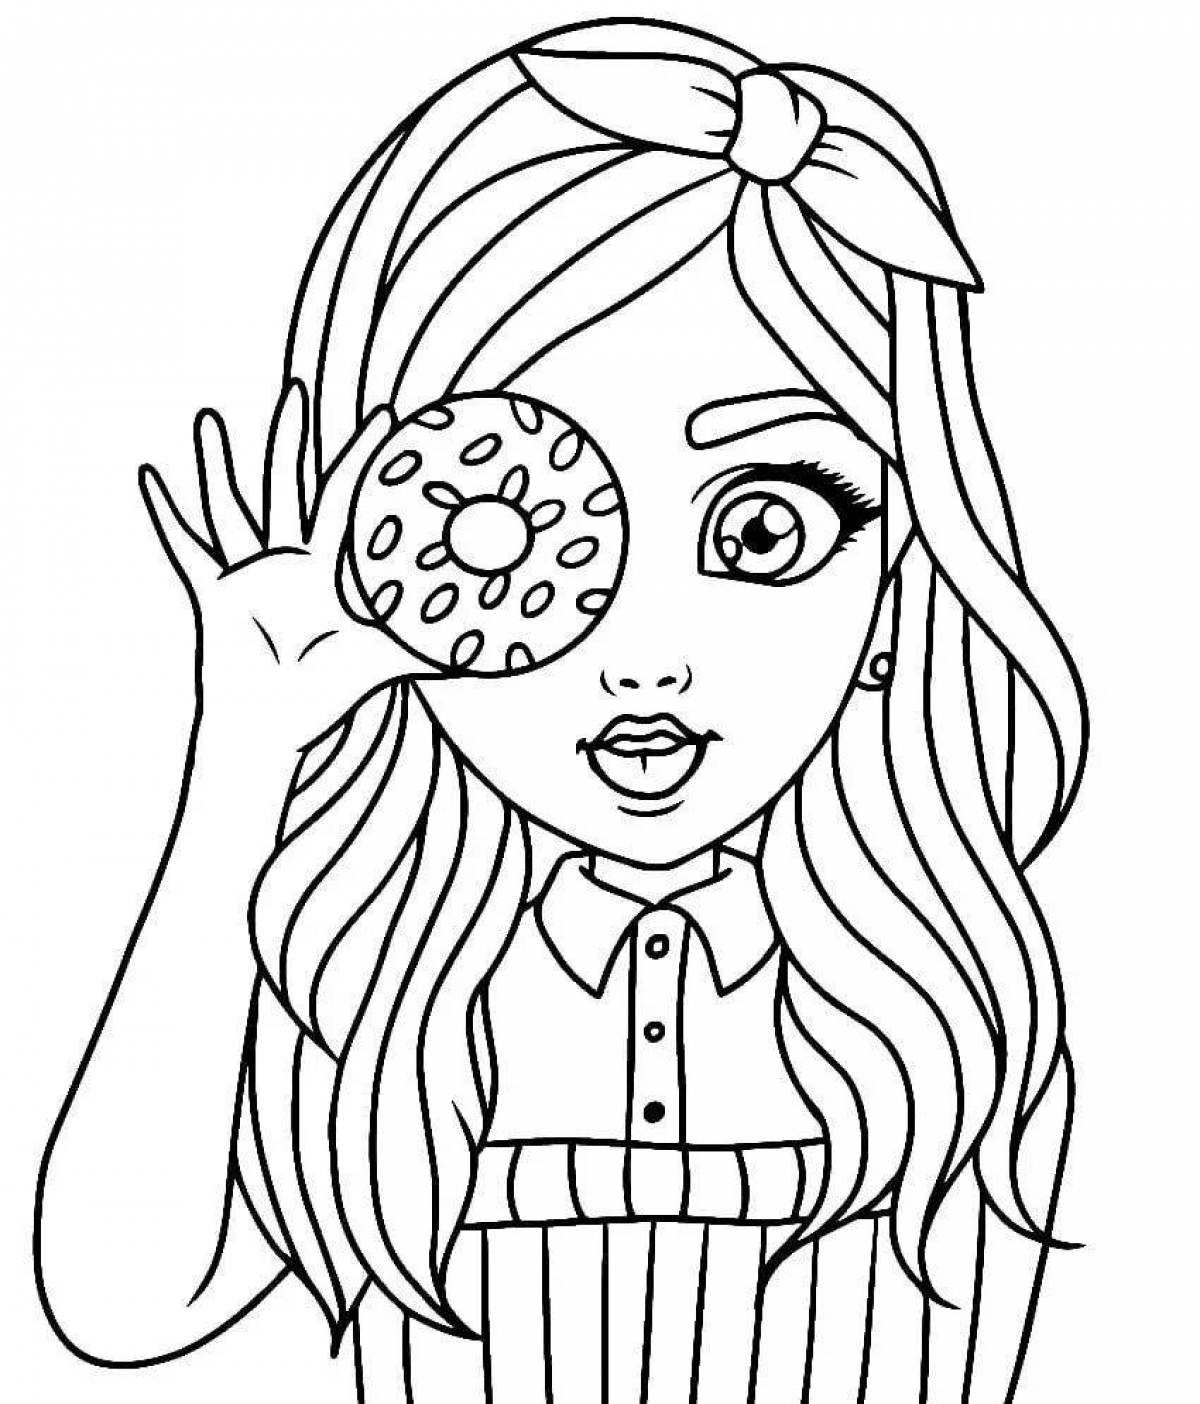 Delightful coloring book for girls 14-15 years old